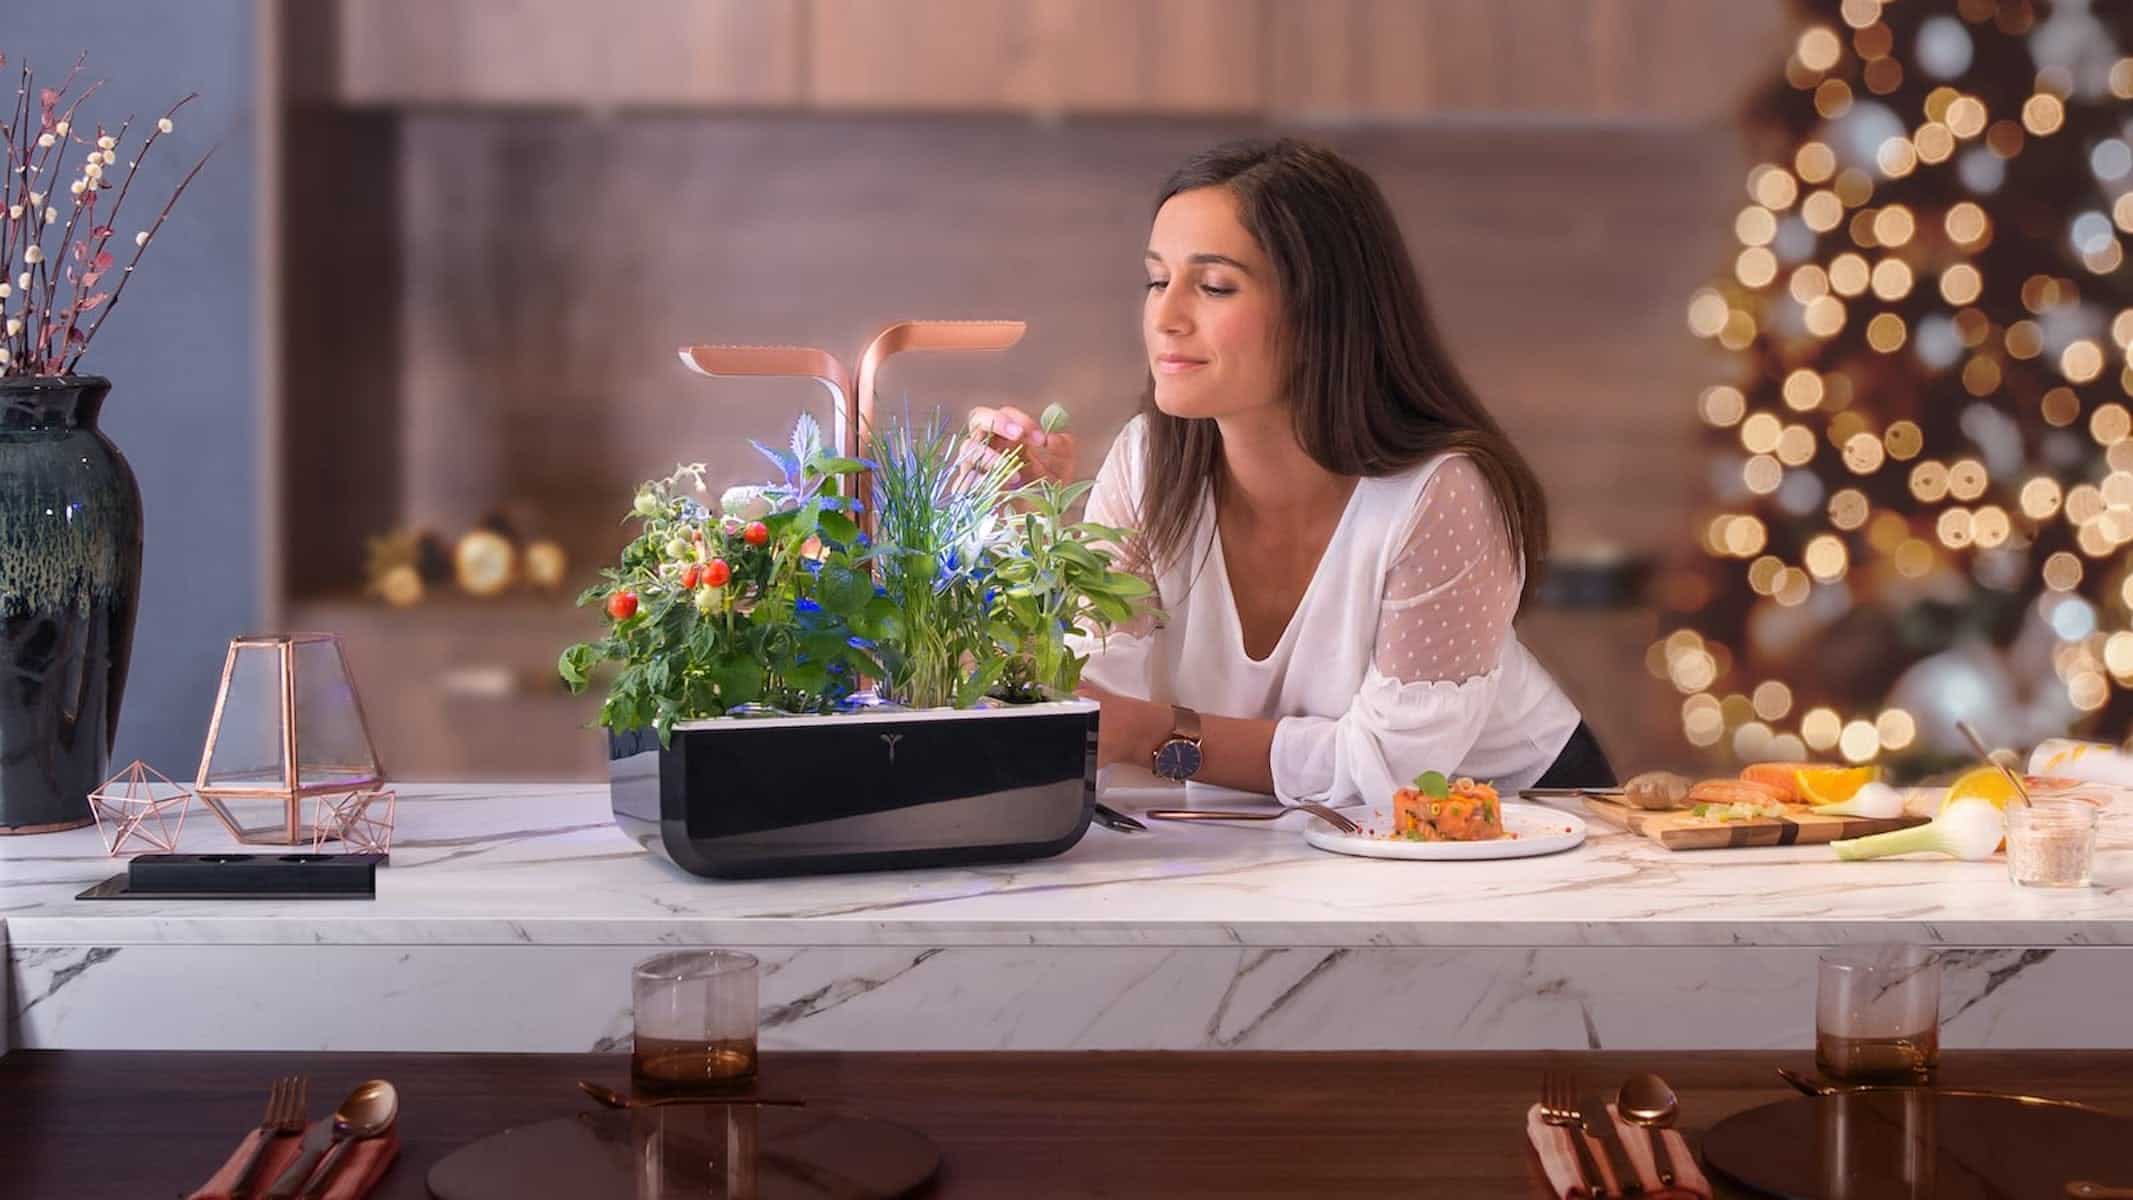 Build the kitchen garden of your dreams with these smart garden gadgets